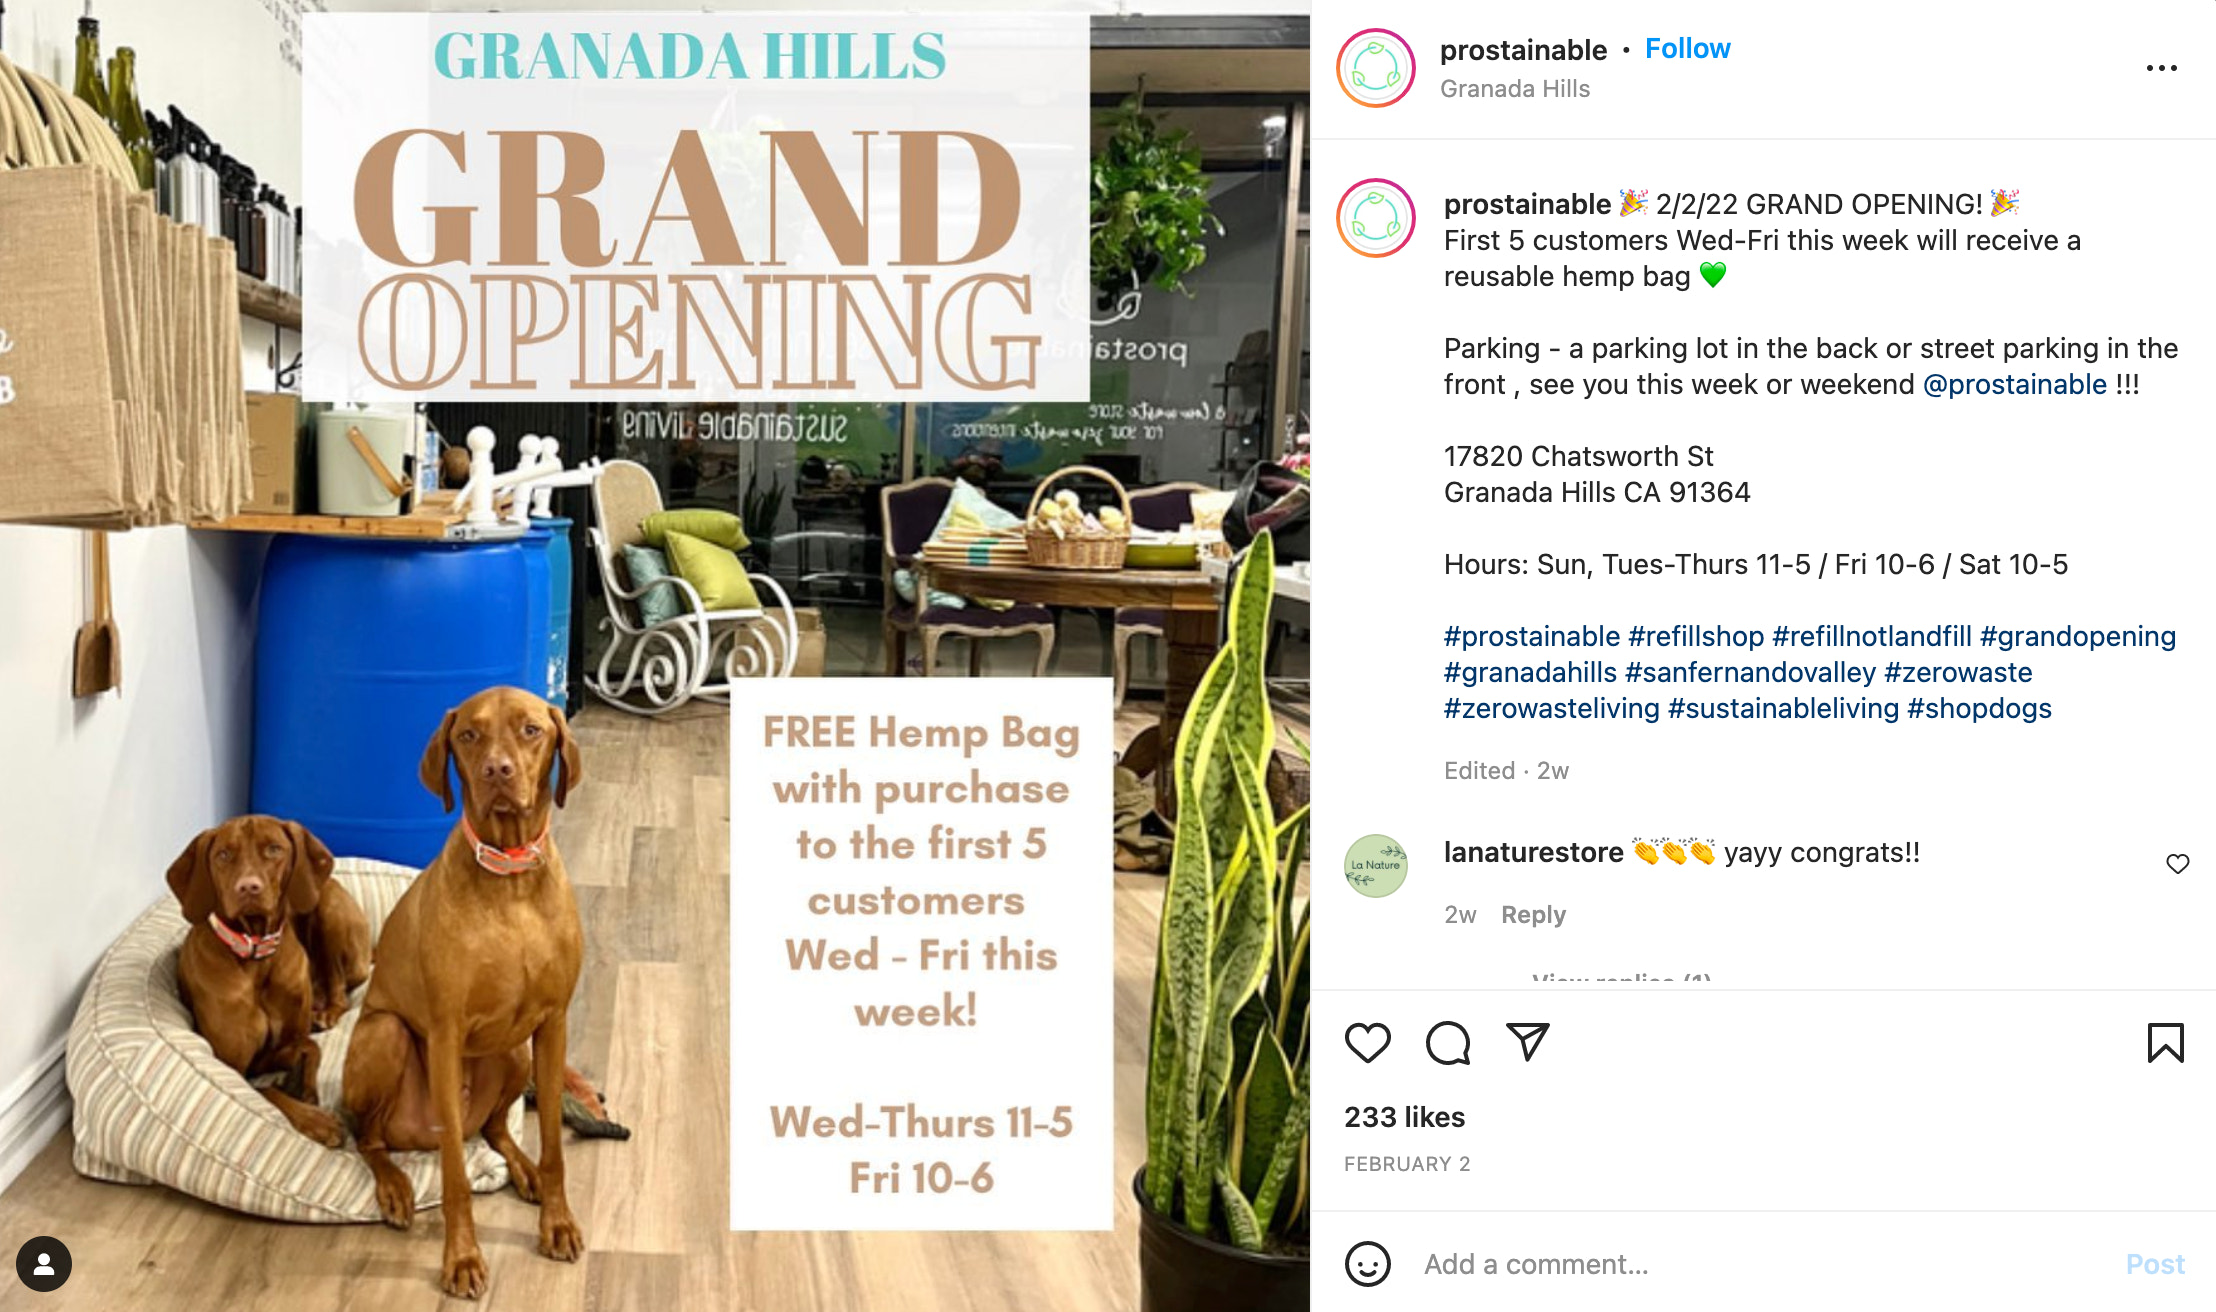 Screengrab of an instagram post announcing Prostainable's grand opening giveaway